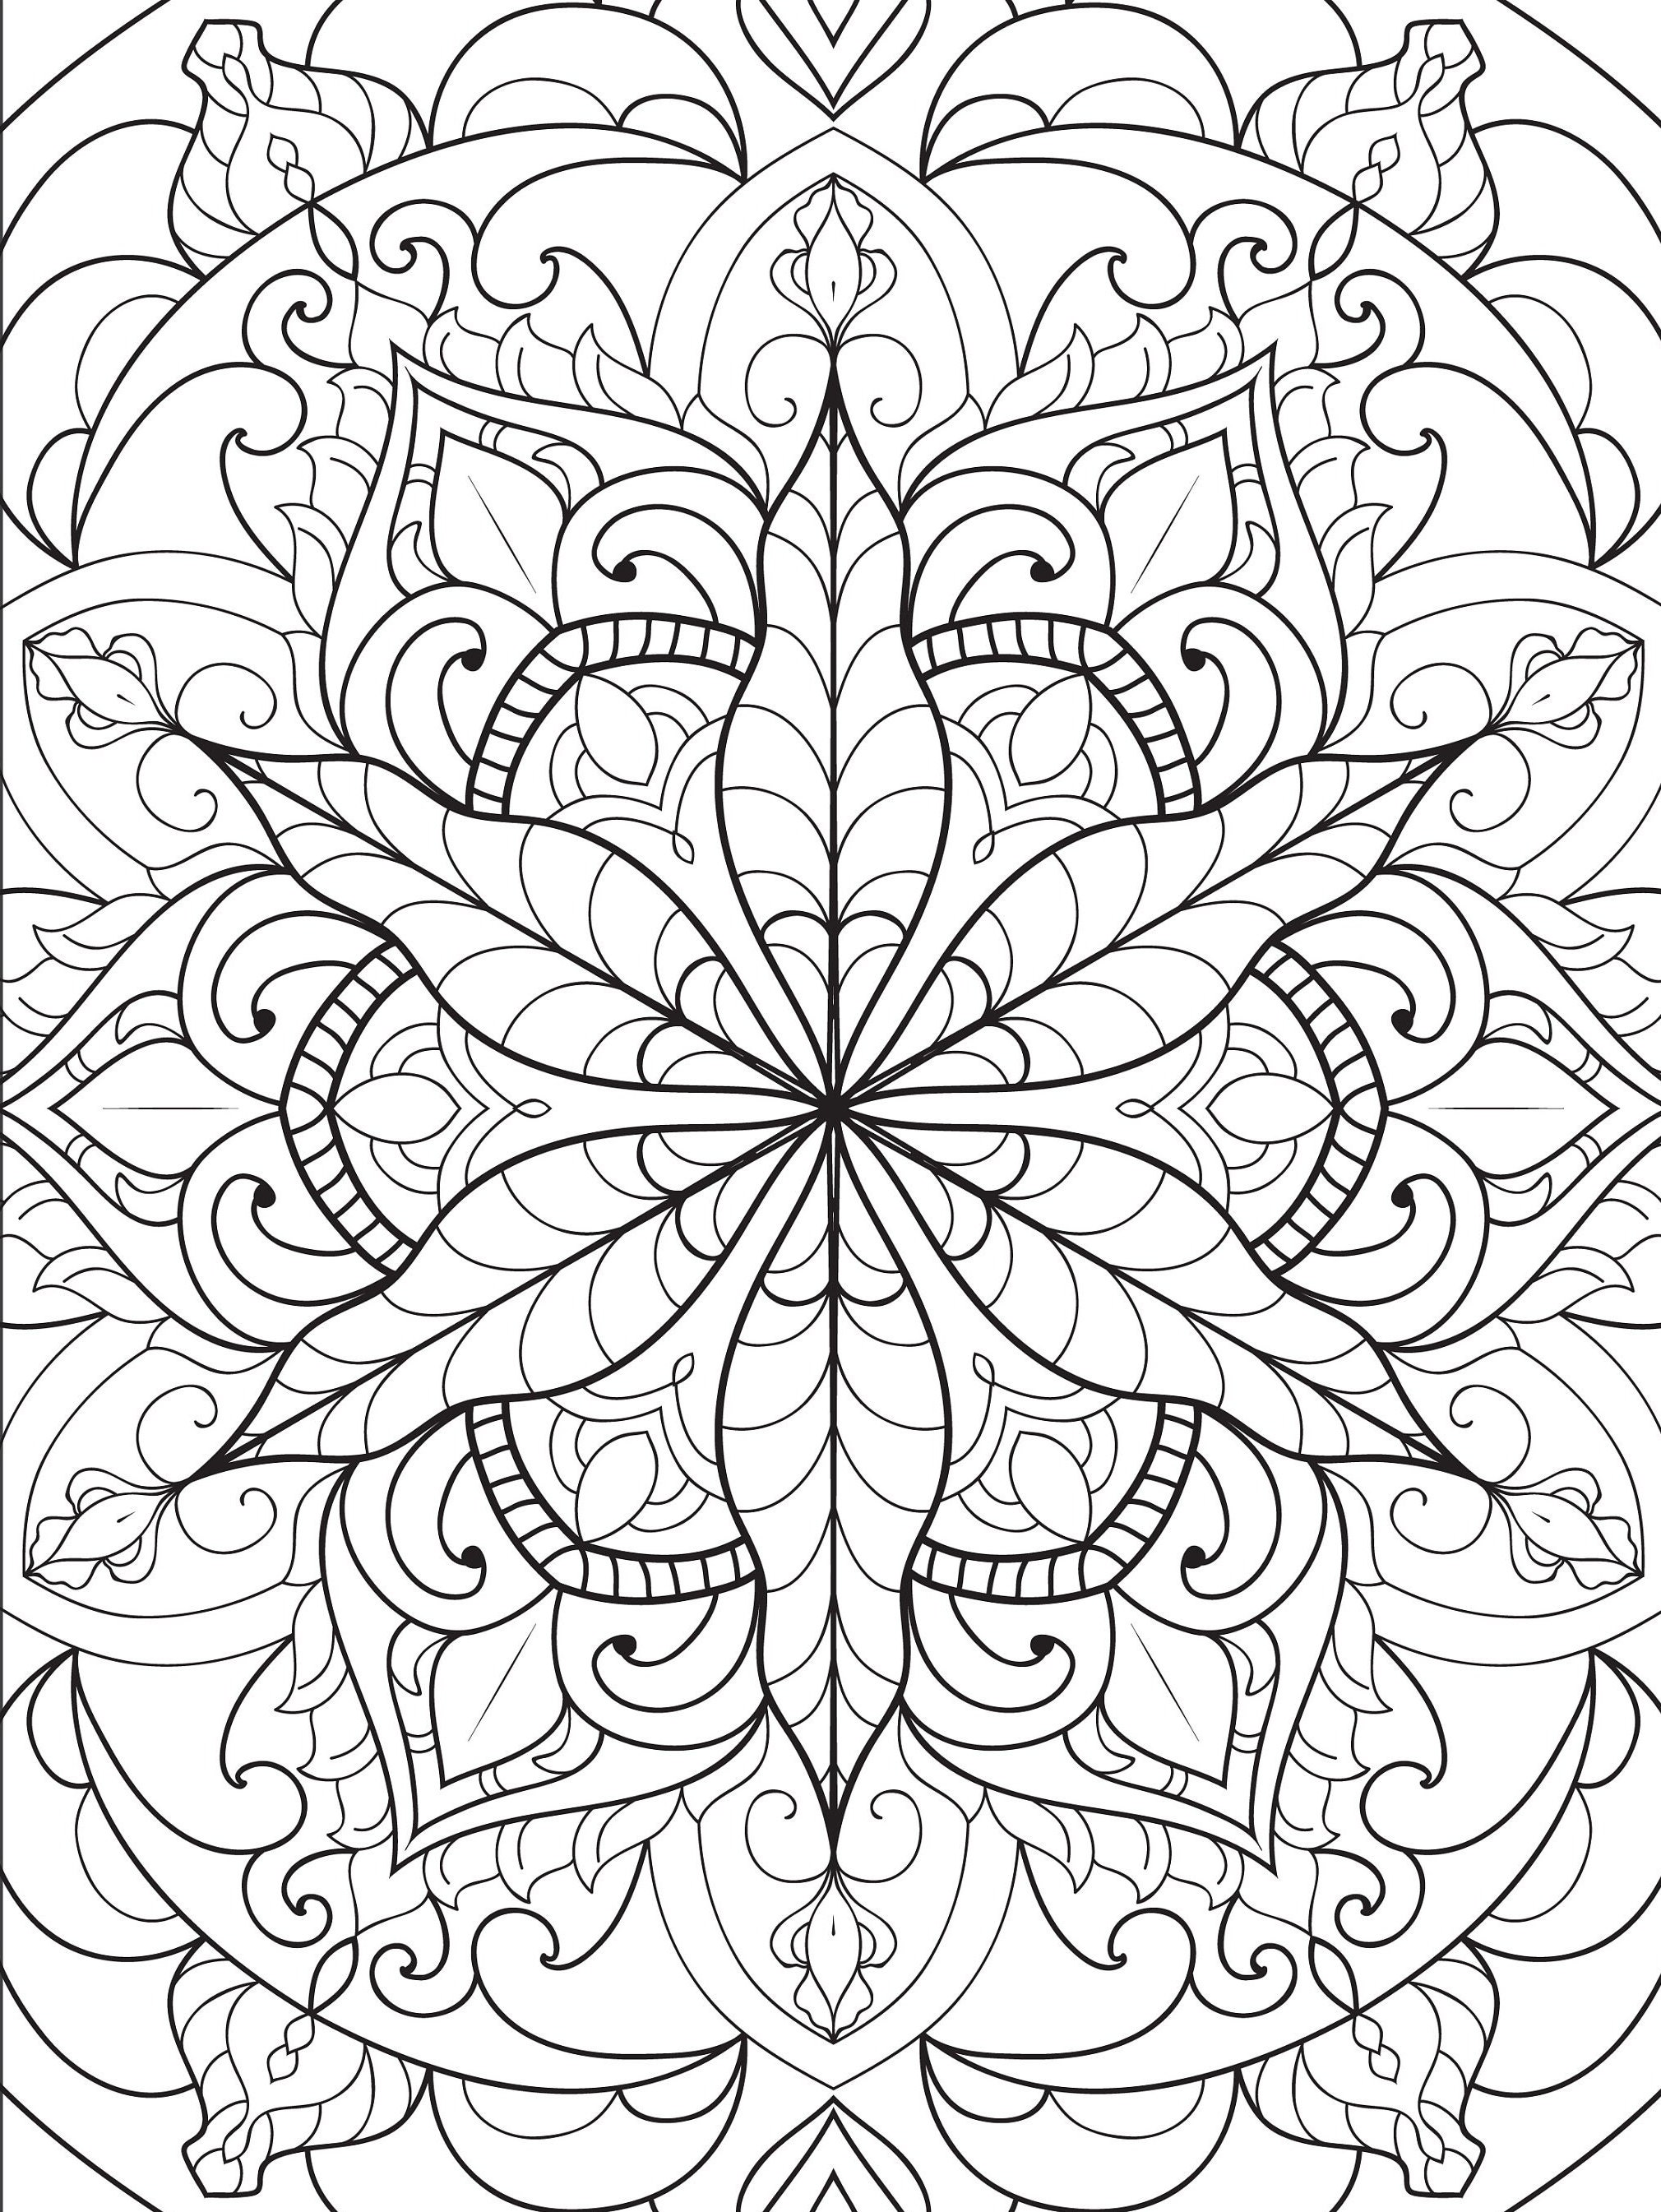 Beautiful 100 Mandalas Coloring Book for Girls Ages 8-12: Cute simple and  easy mandalas coloring book for Girls Teens relaxation and stress  management (Paperback)